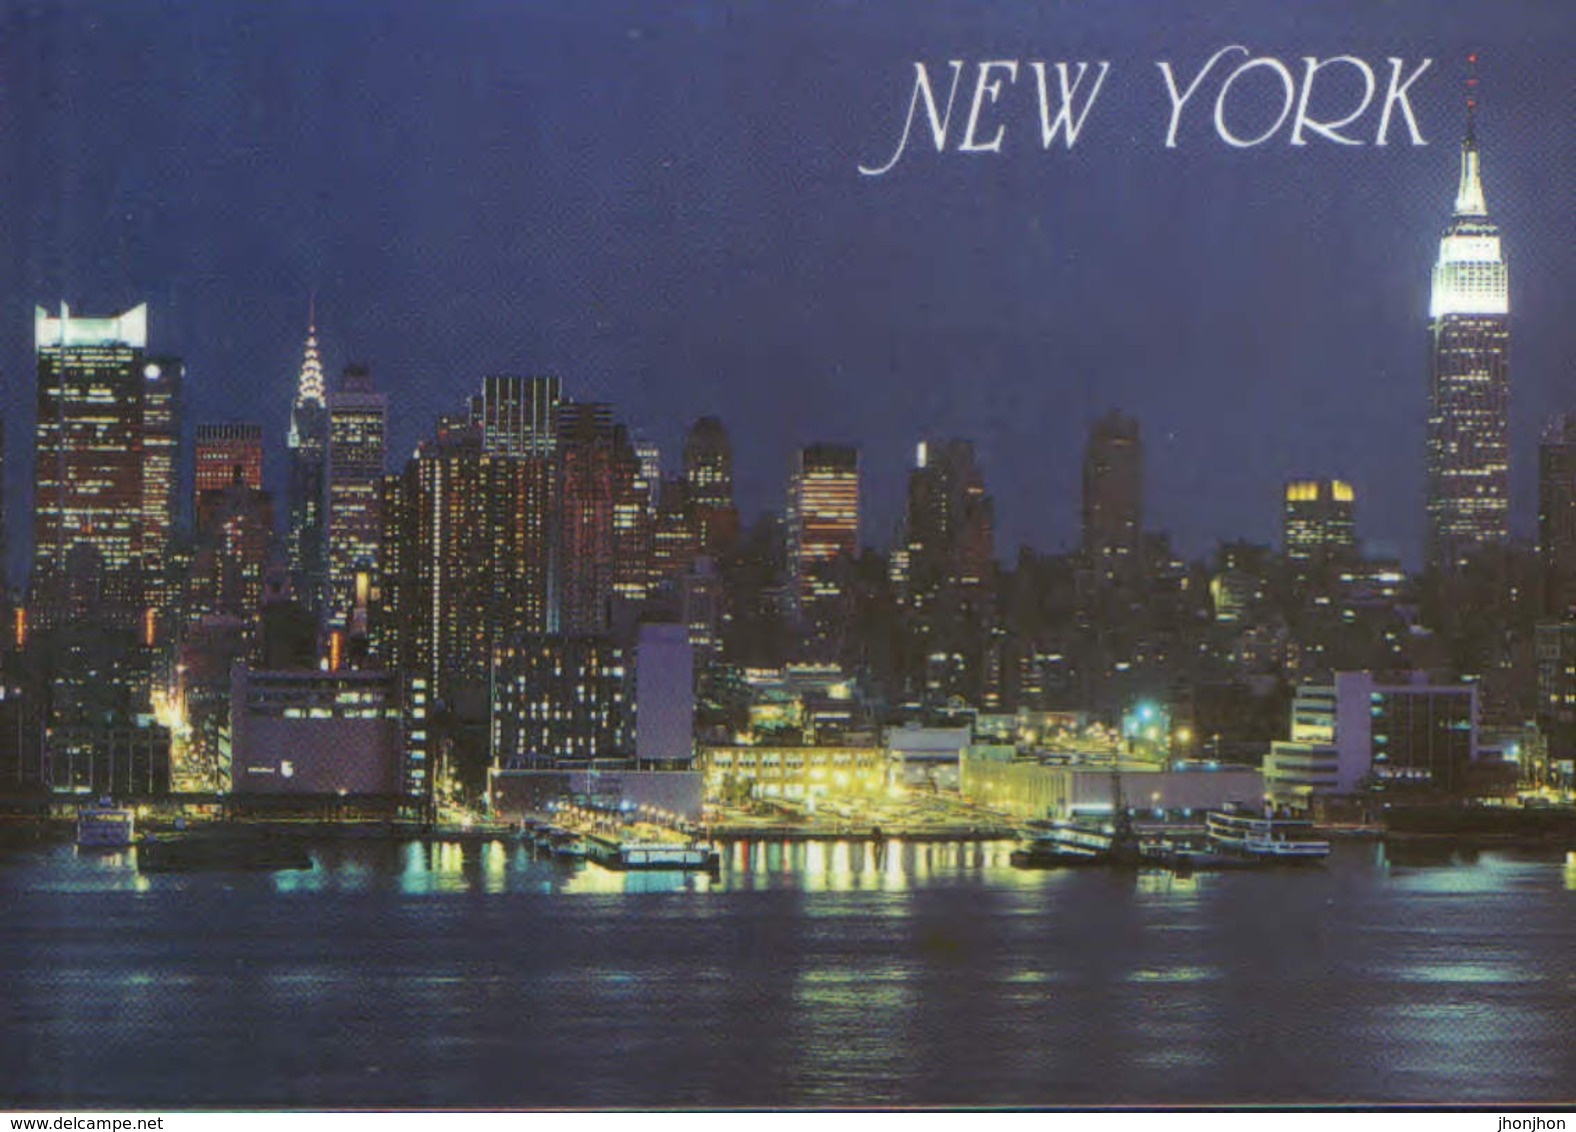 United States - Postcard Unused - Spectacular Night View Of West Side New York Skyline With The Hudson River - Hudson River